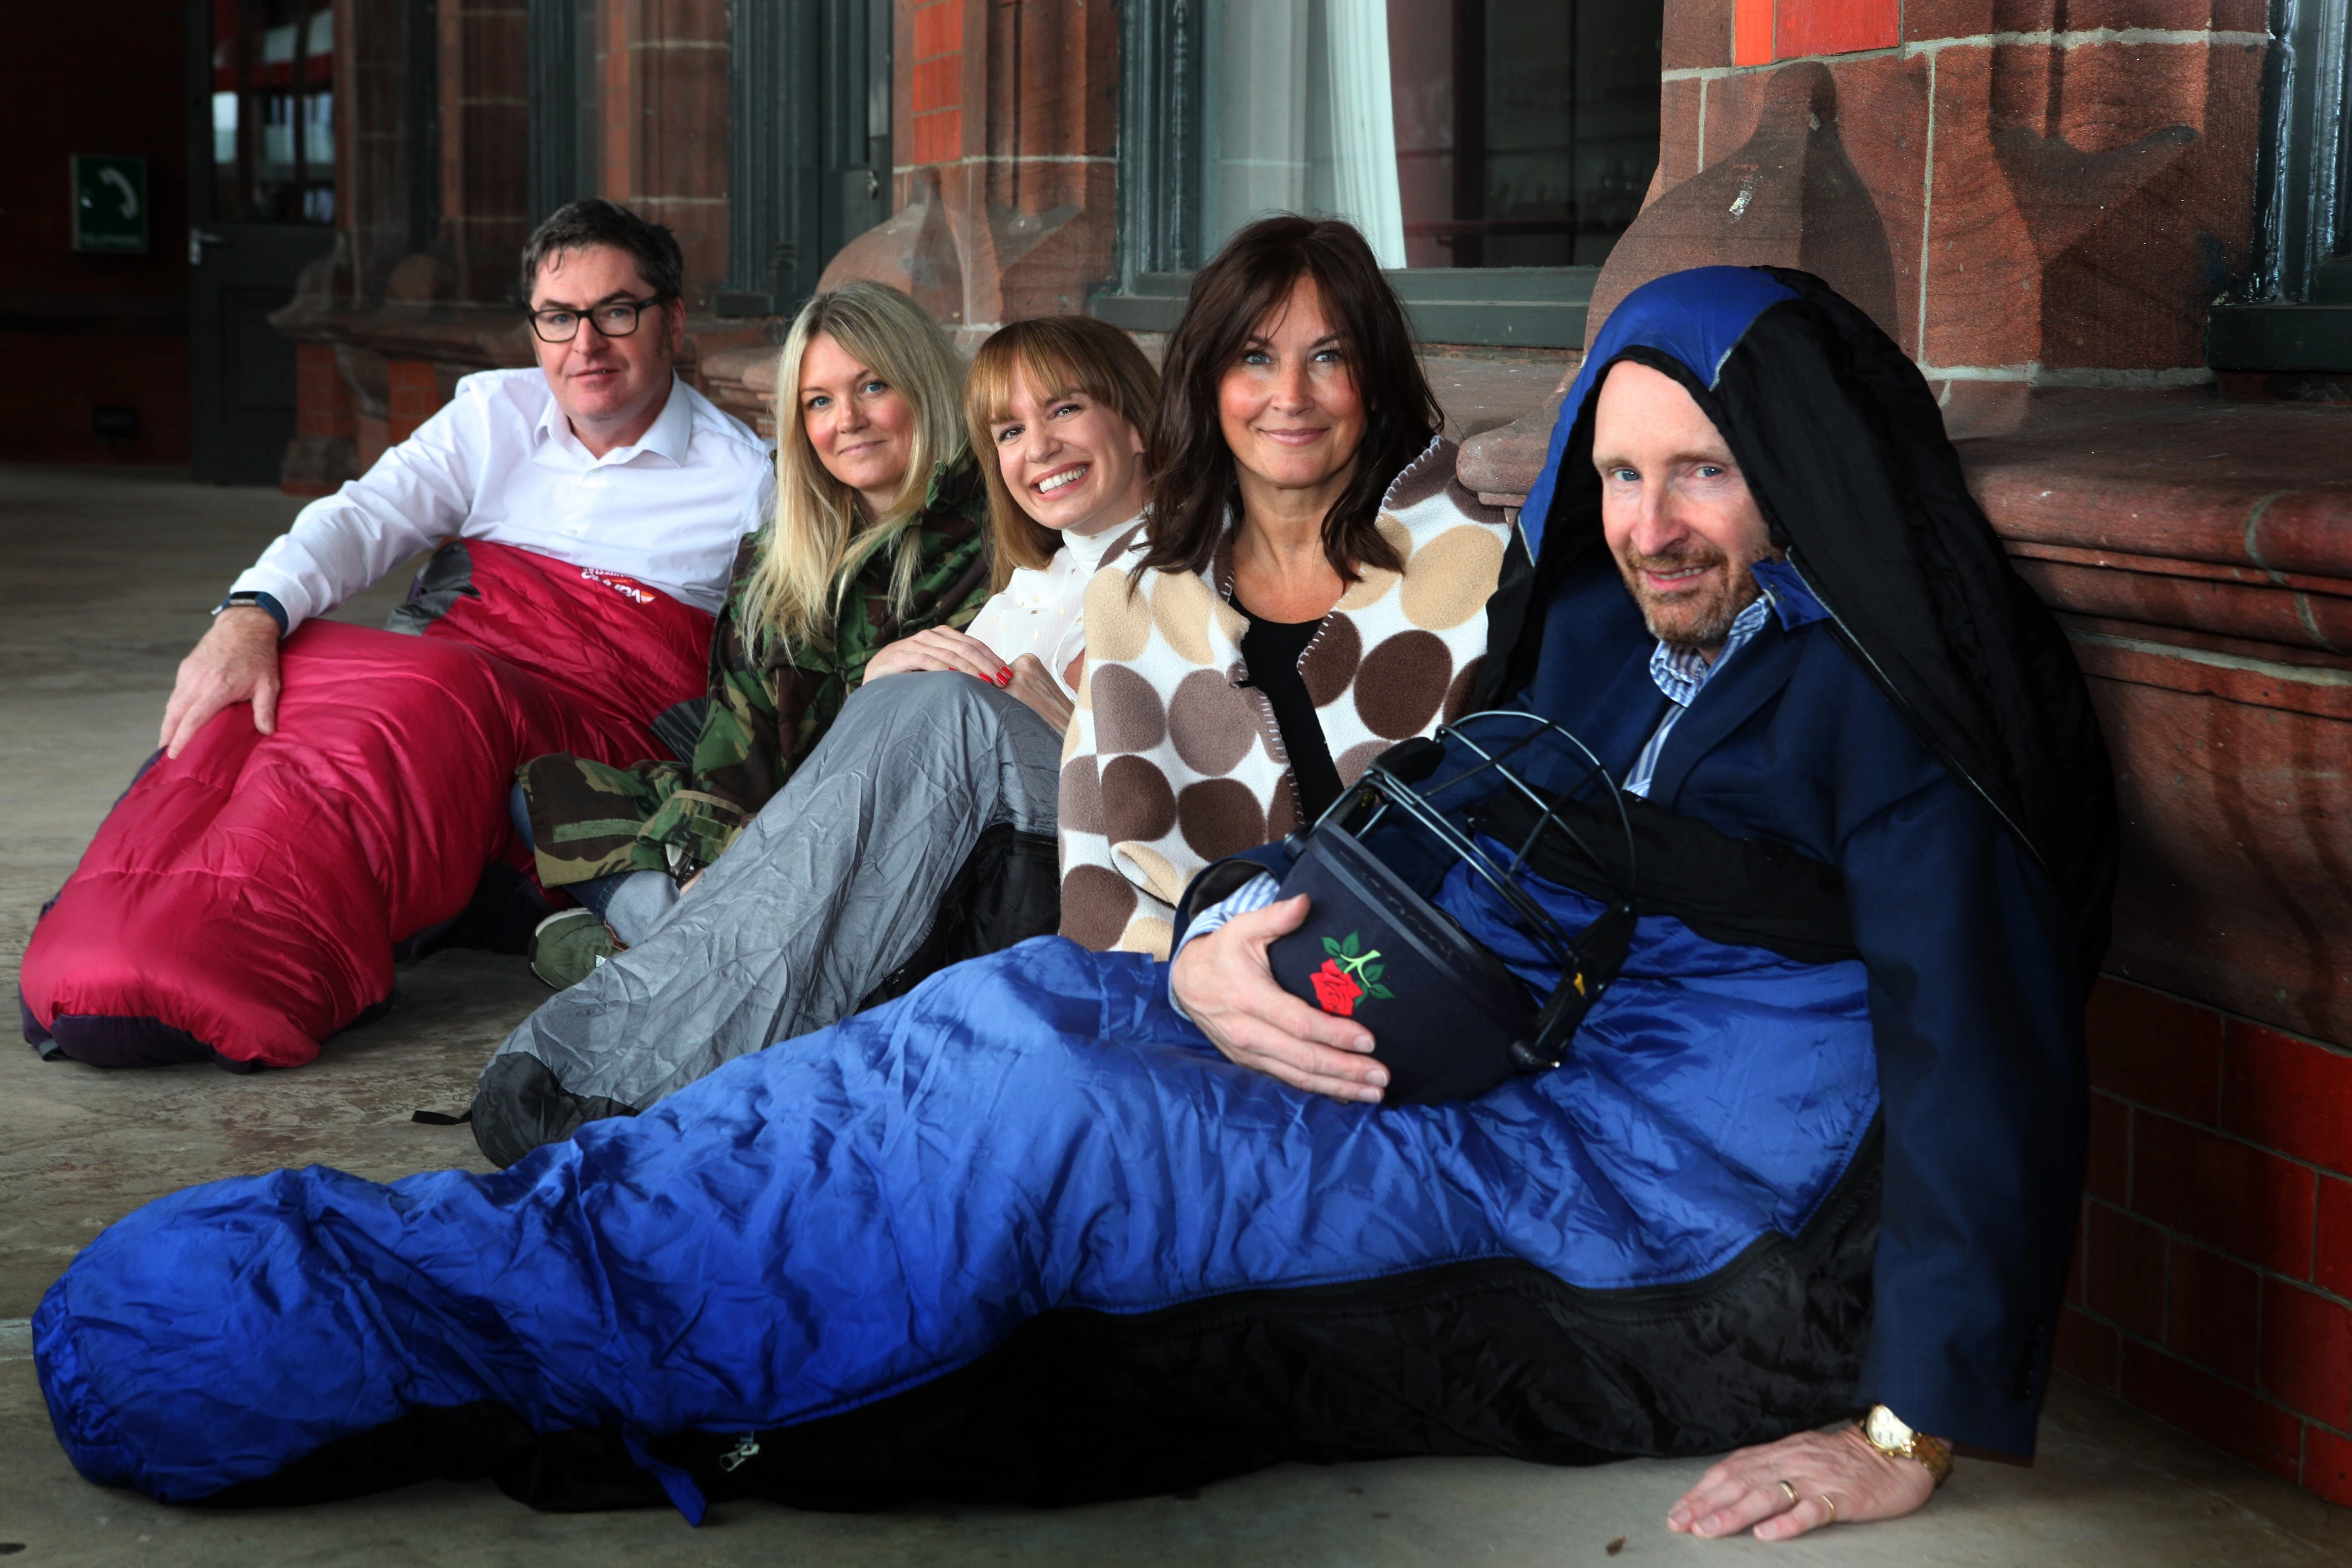 CEO Sleep Out Manchester